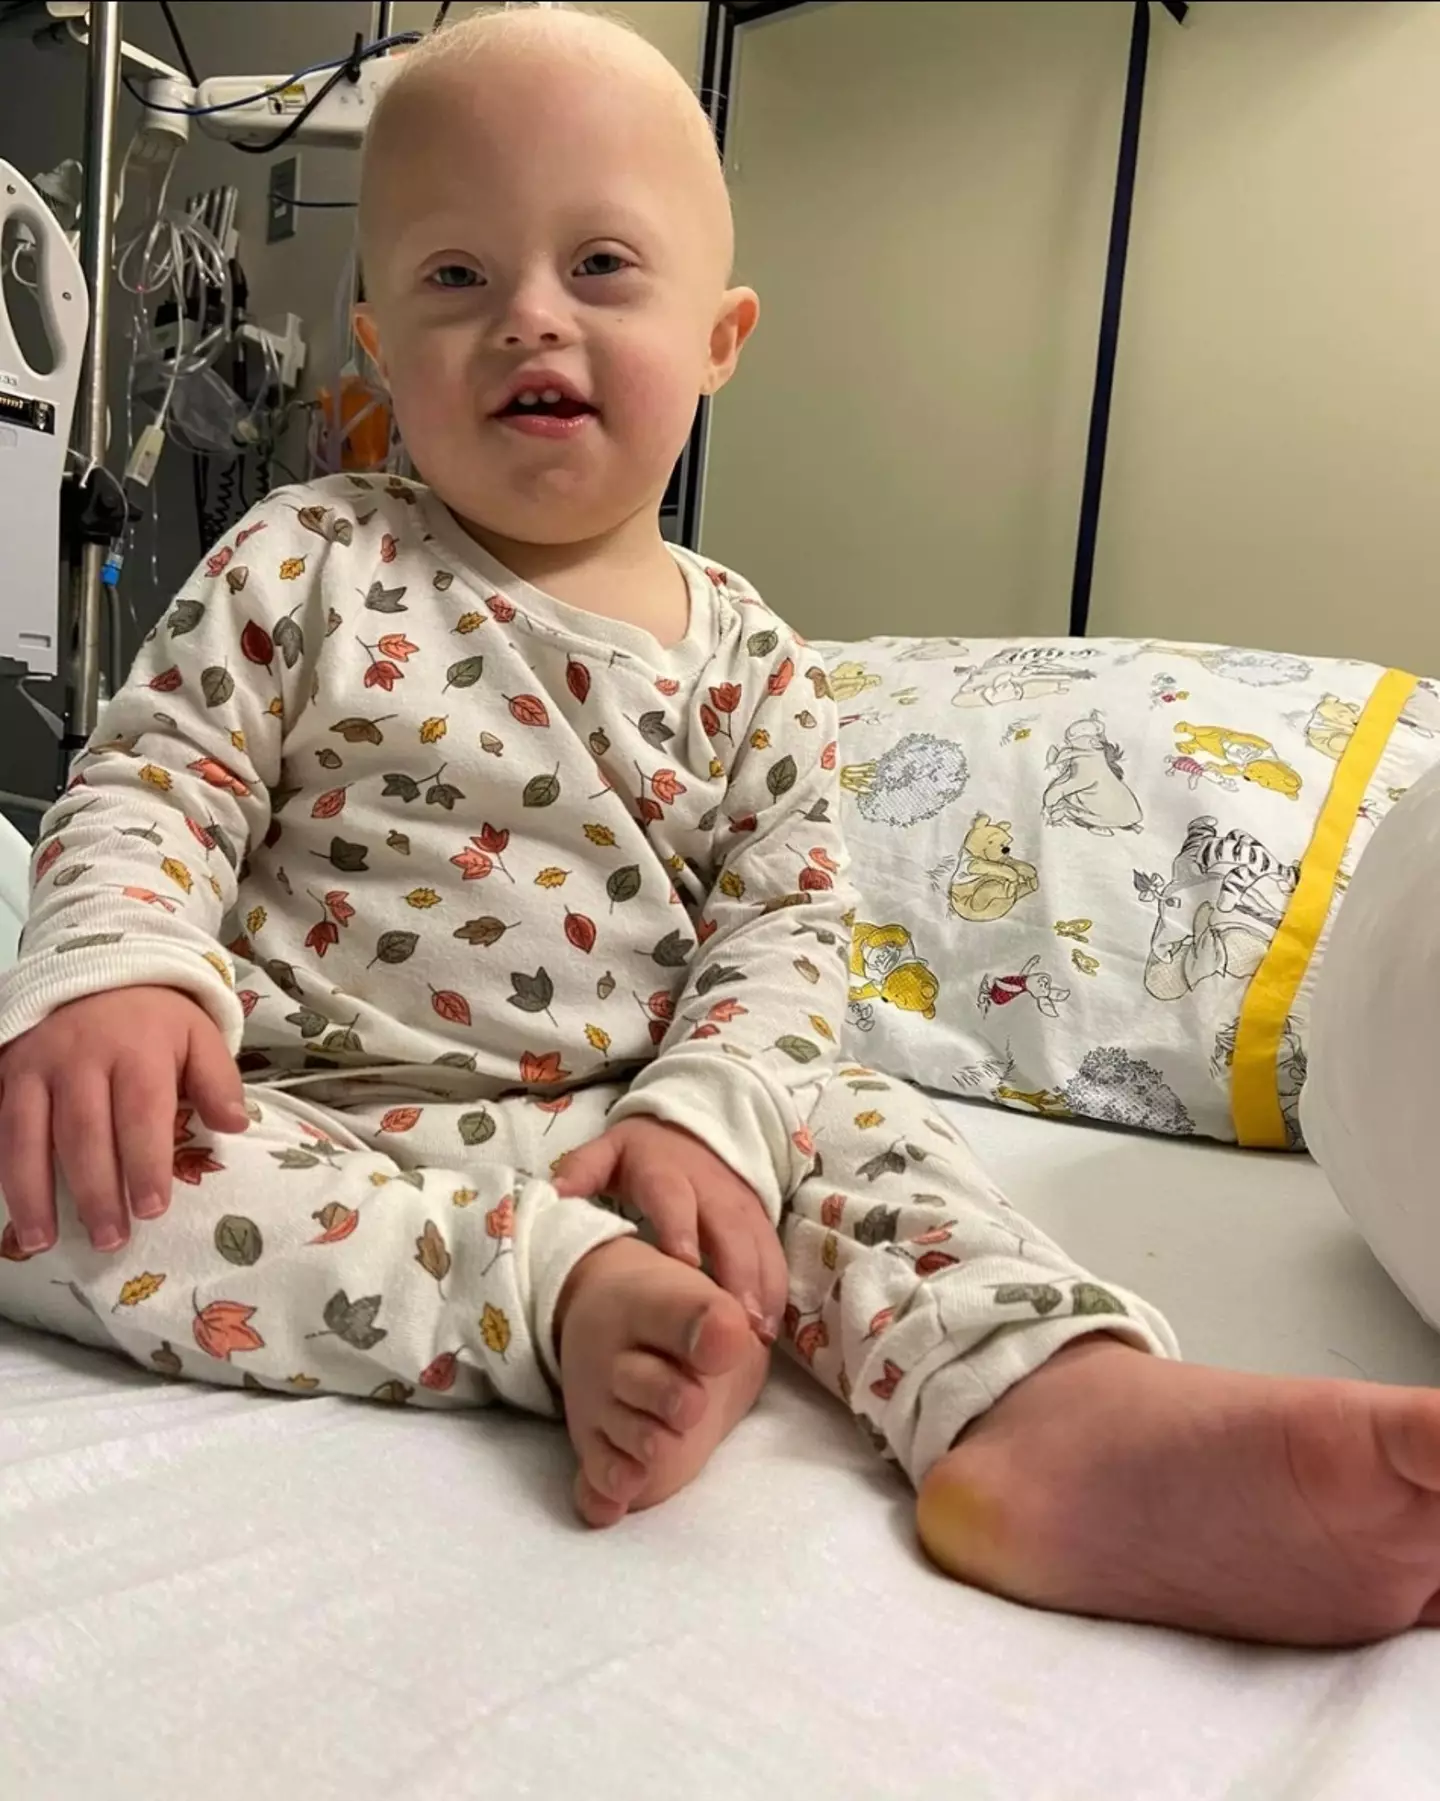 The toddler had four rounds of chemotherapy in total.